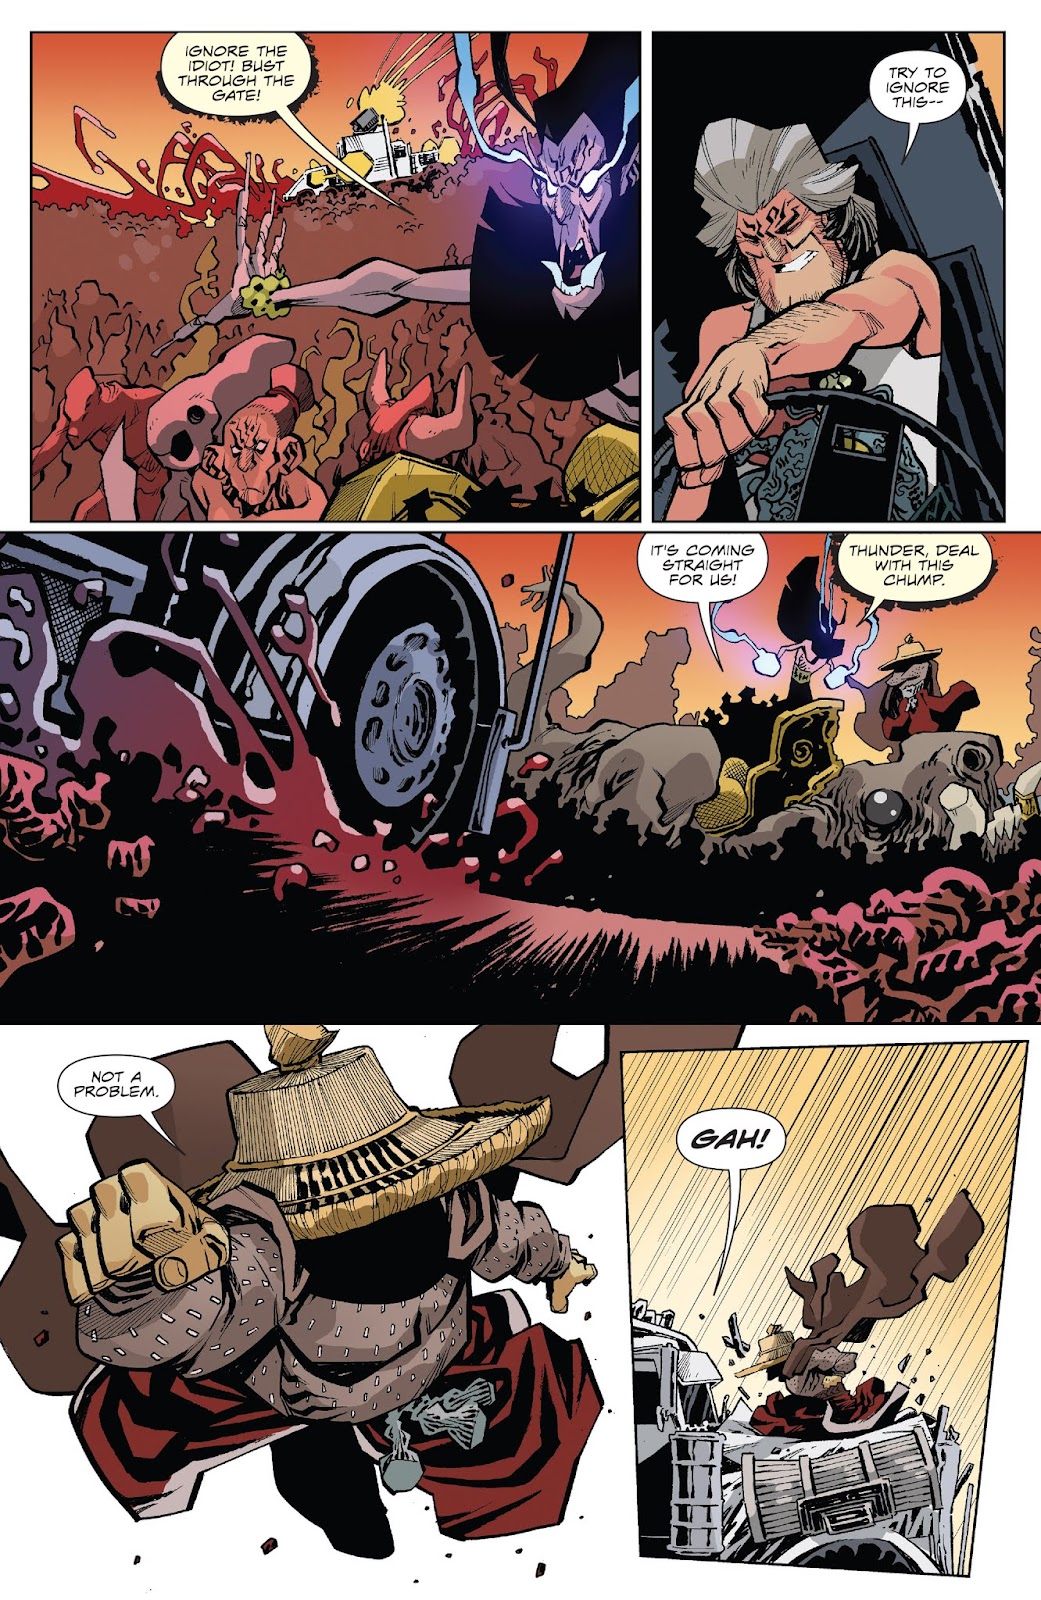 Big Trouble in Little China: Old Man Jack issue 11 - Page 16